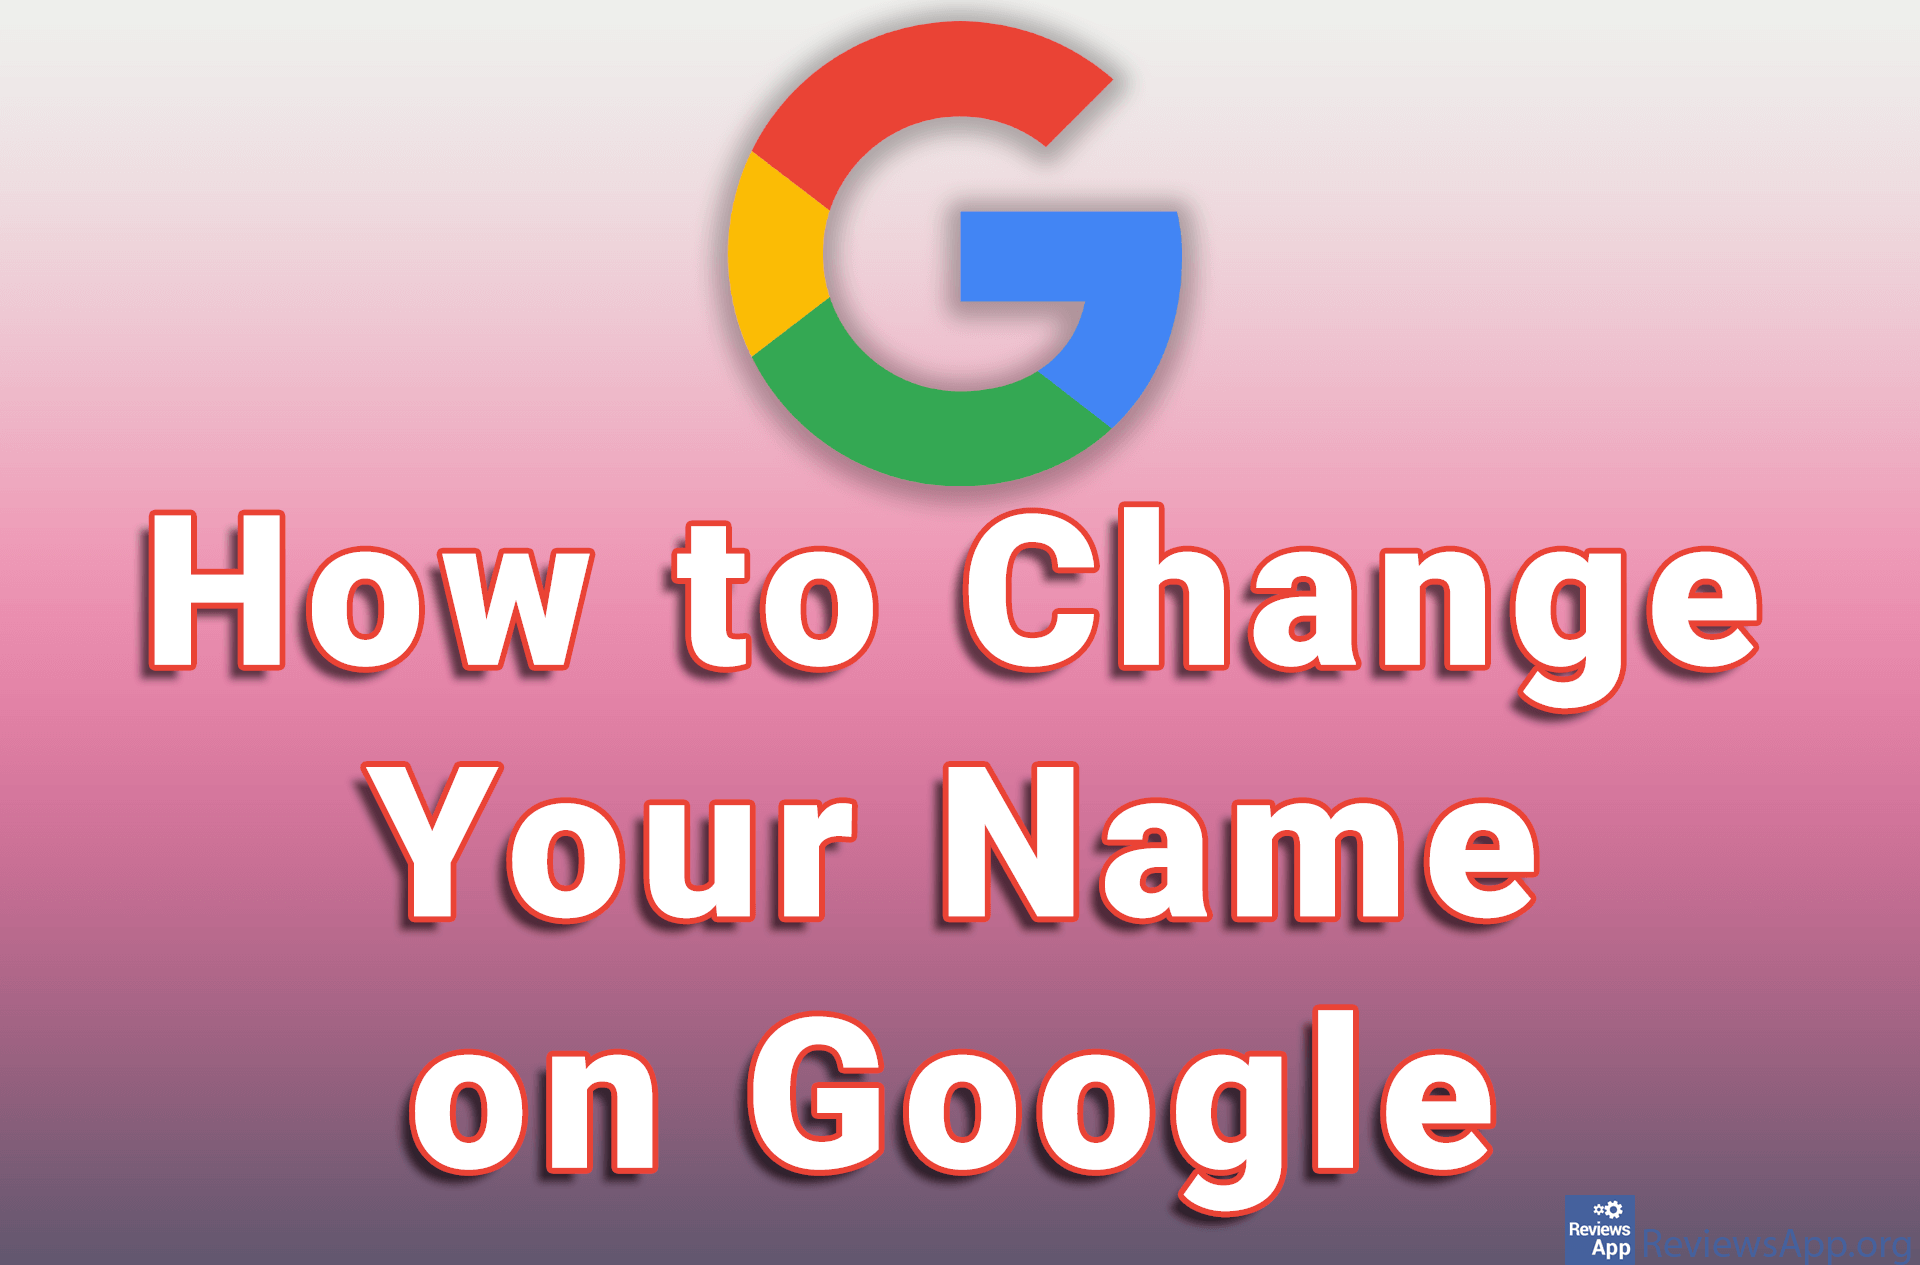 How to Change Your Name on Google